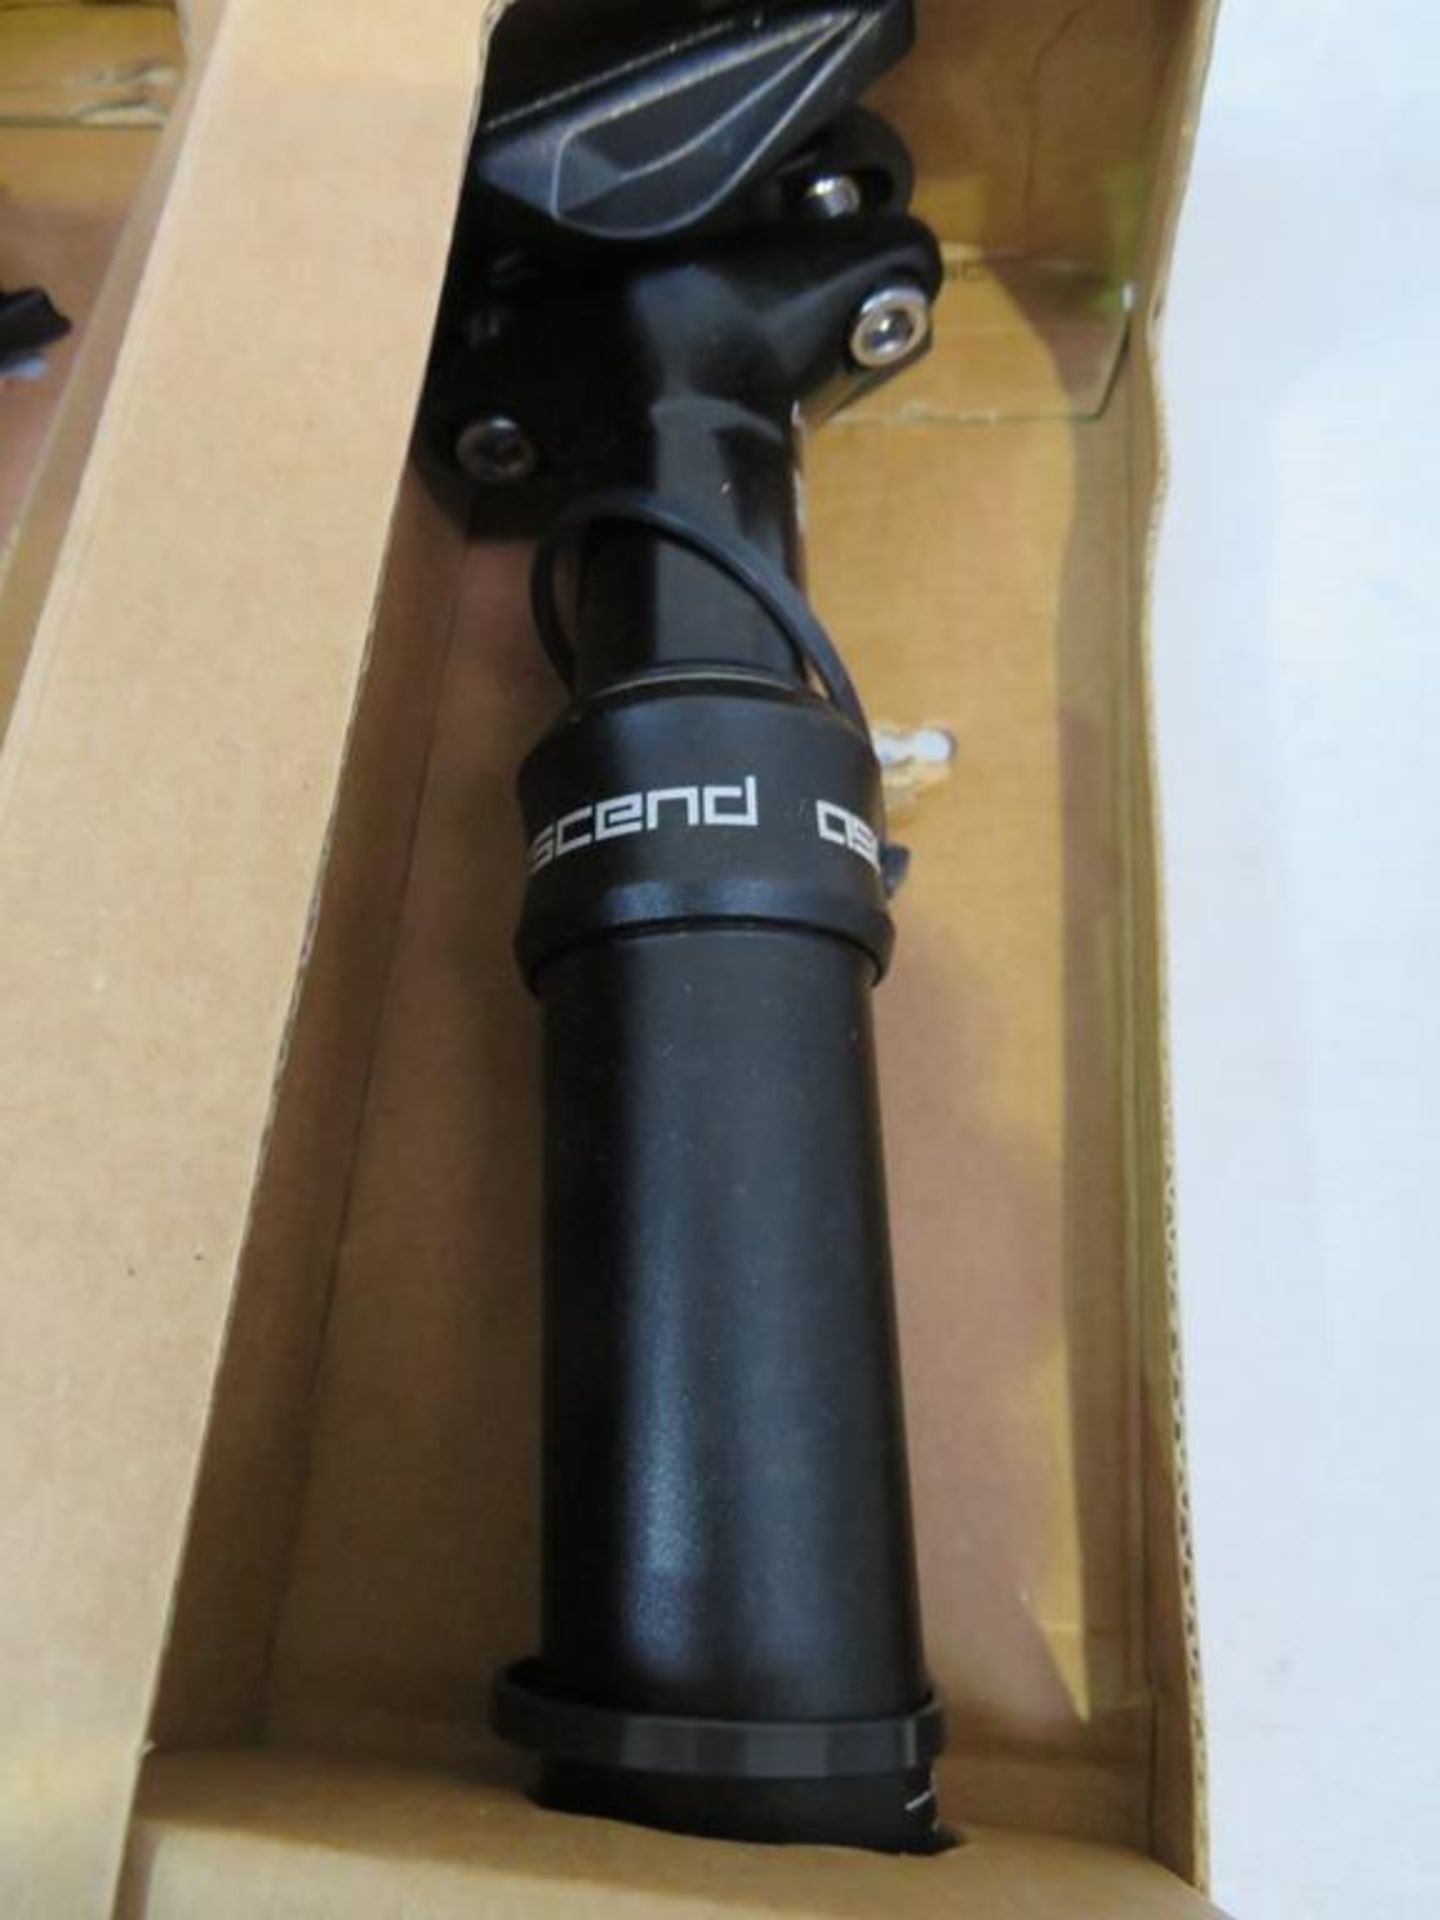 Brand X Ascend Dropper Seat Posts - Image 2 of 2